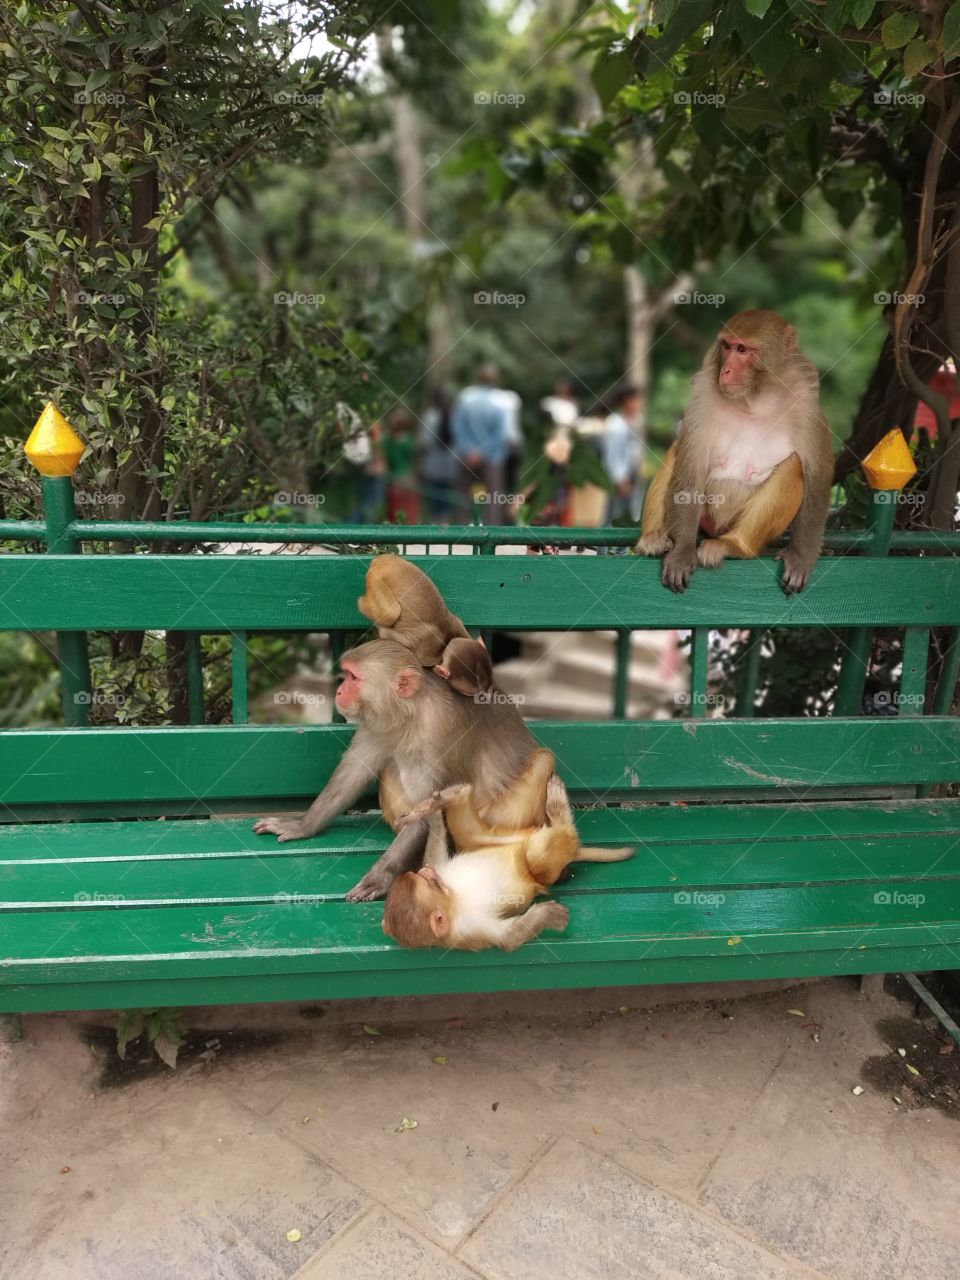 Monkeys are playing with eachother a whole family in fact. They are looking after eachother. Loving eachother & caring eachother.